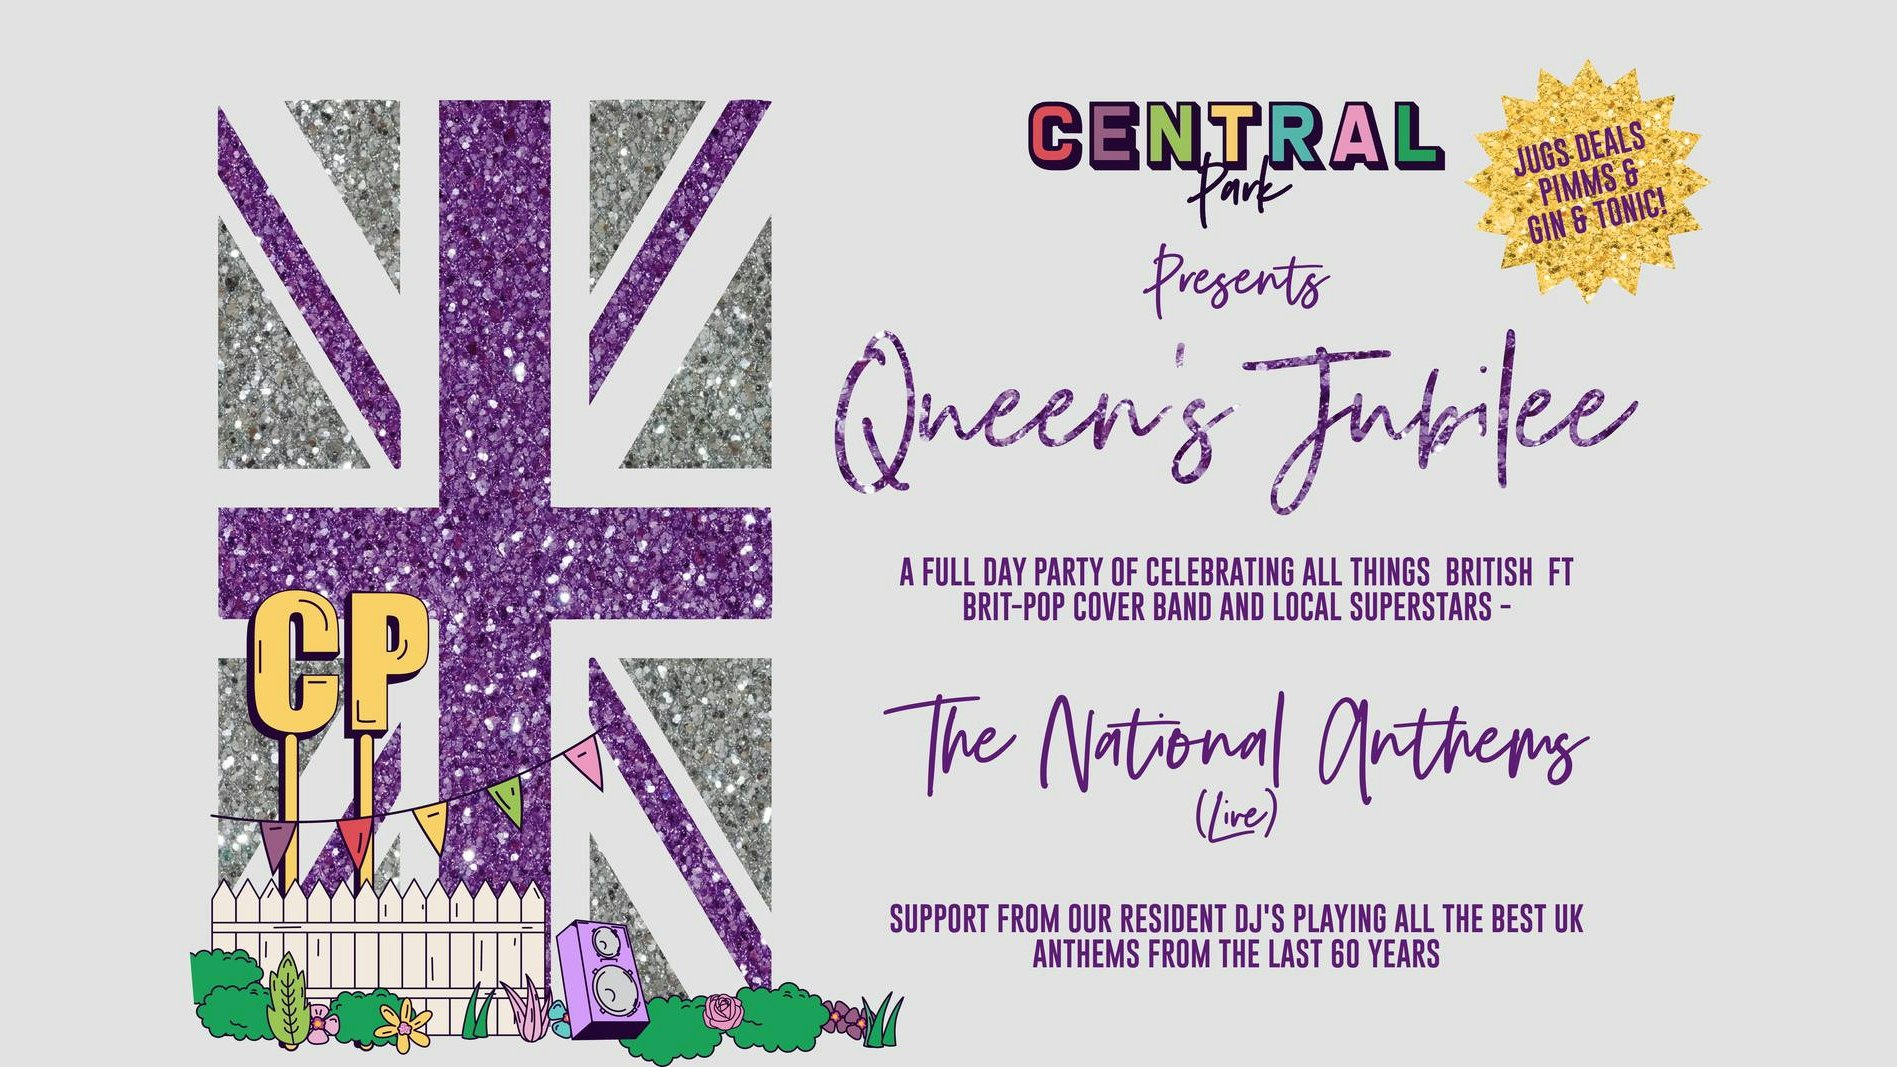 Central Park presents Queen’s Jubilee feat. The National Anthems (Live)